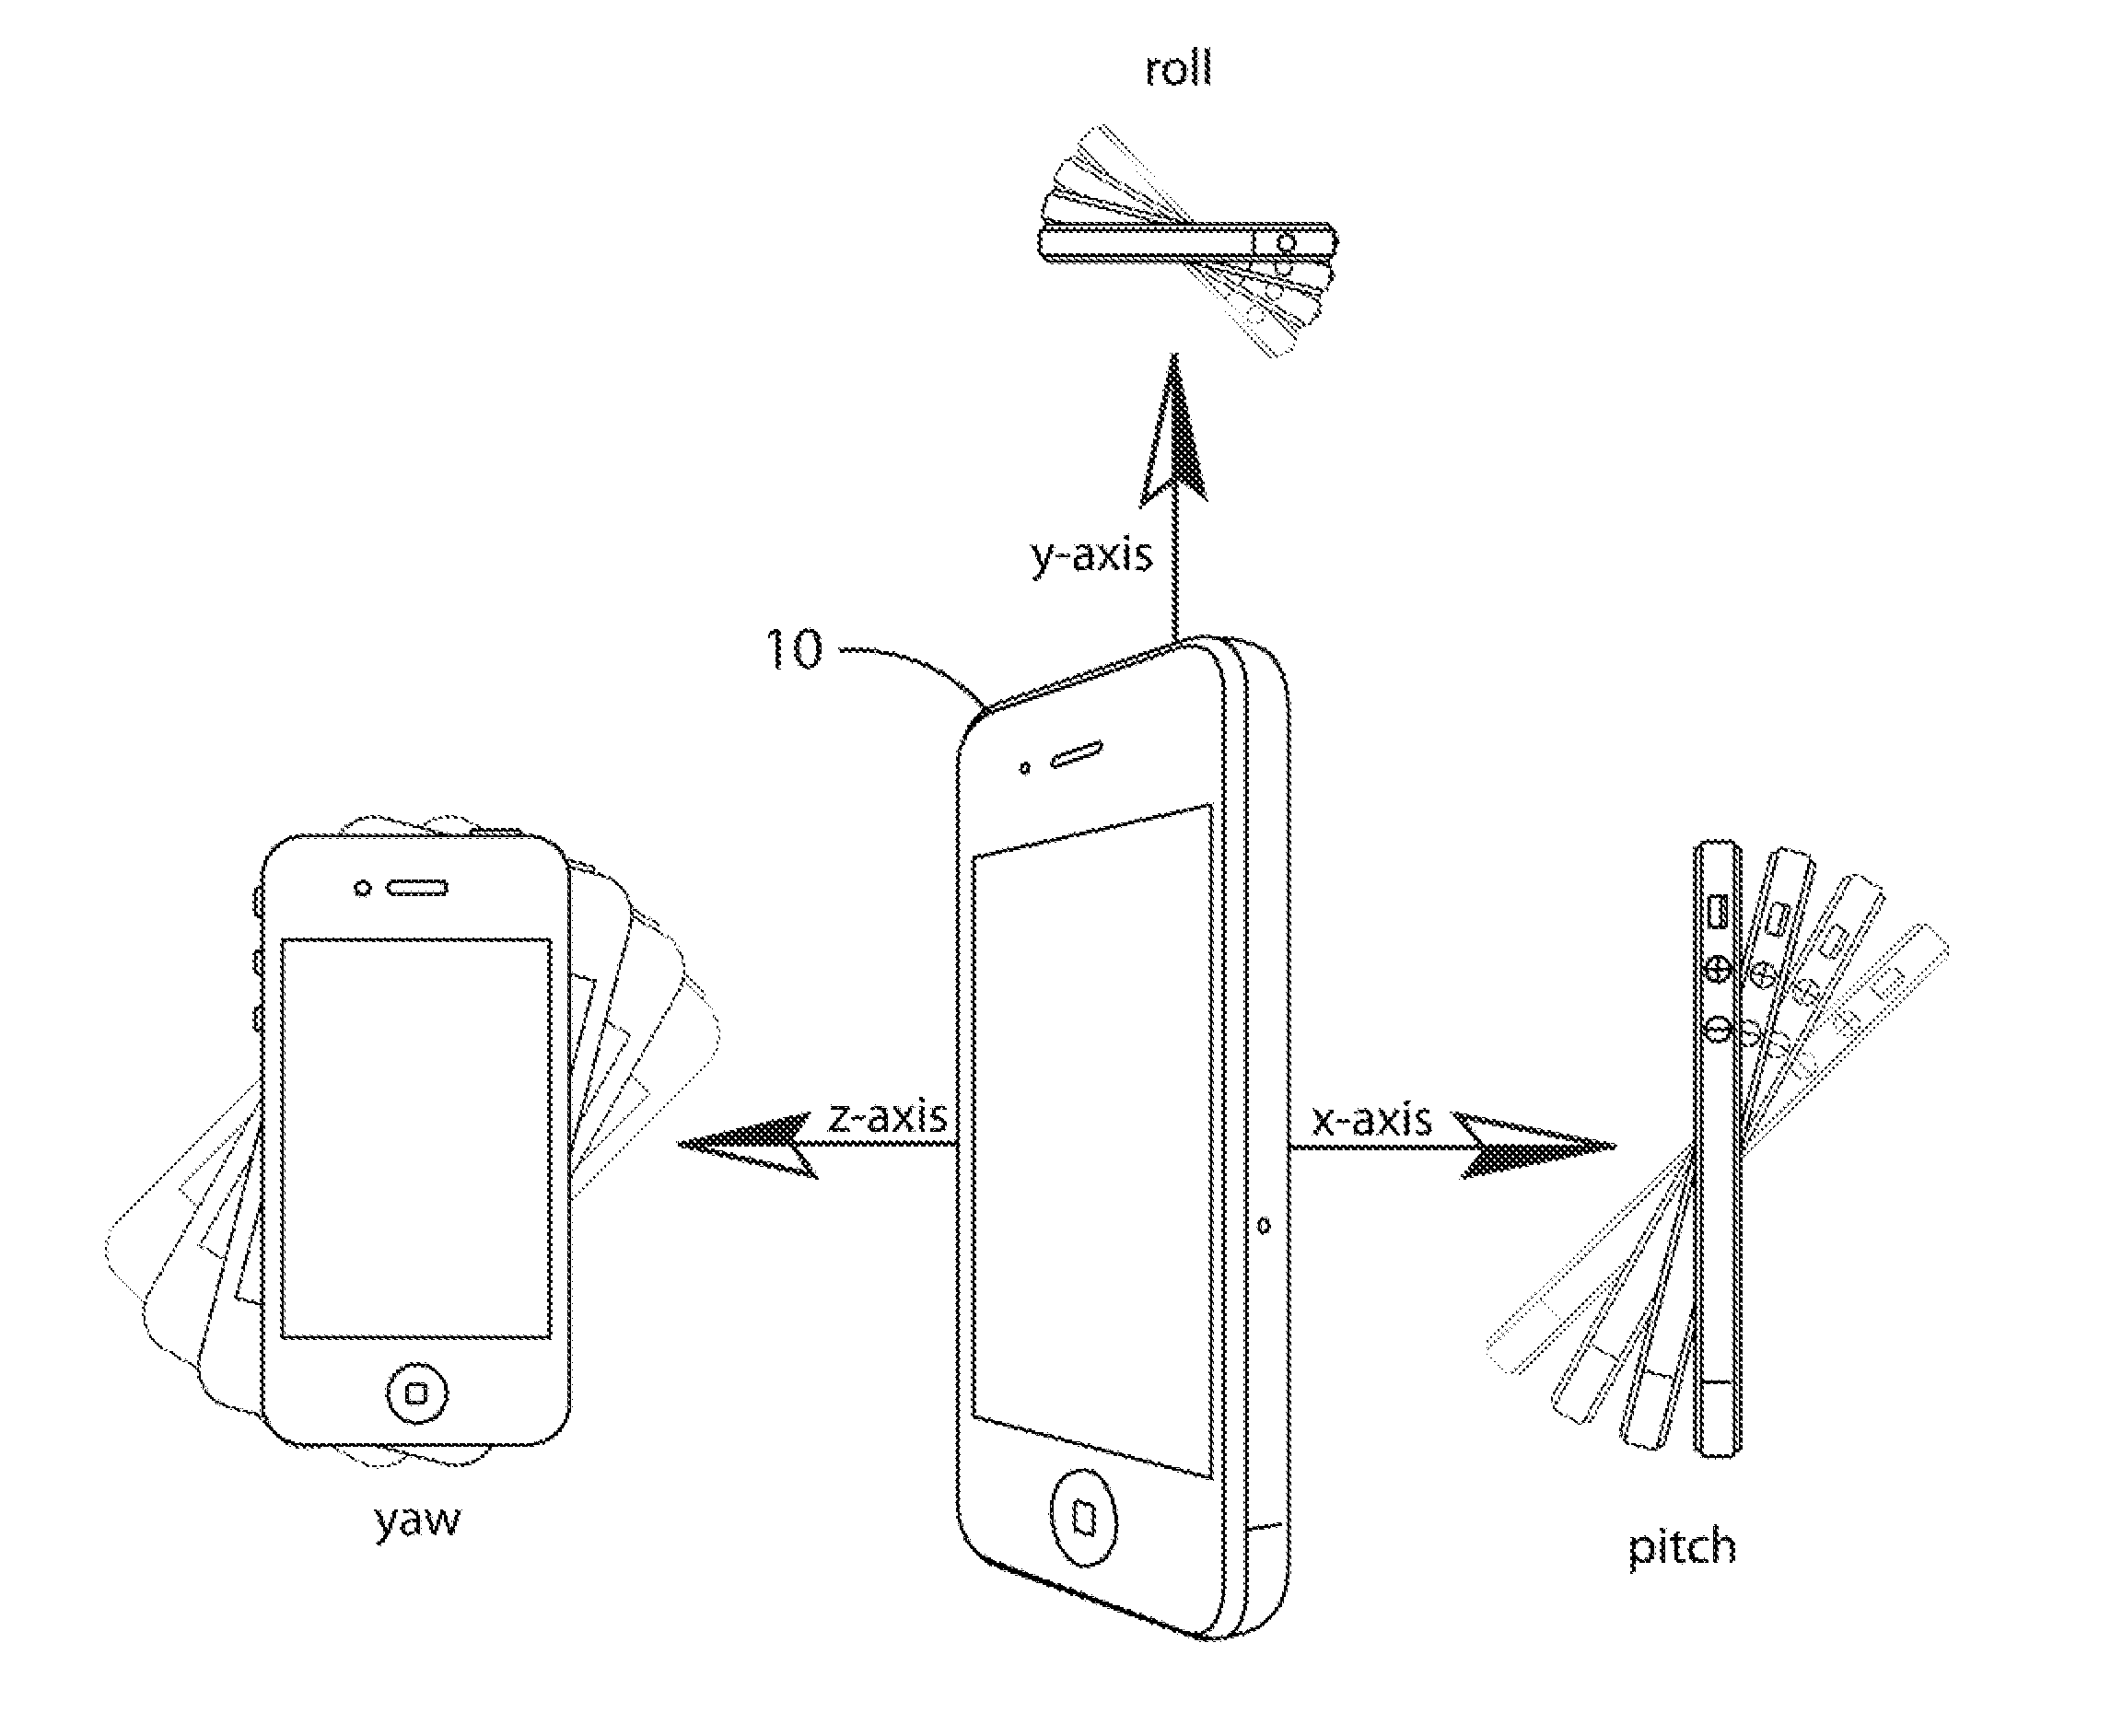 Method and system to analyze sports motions using motion sensors of a mobile device